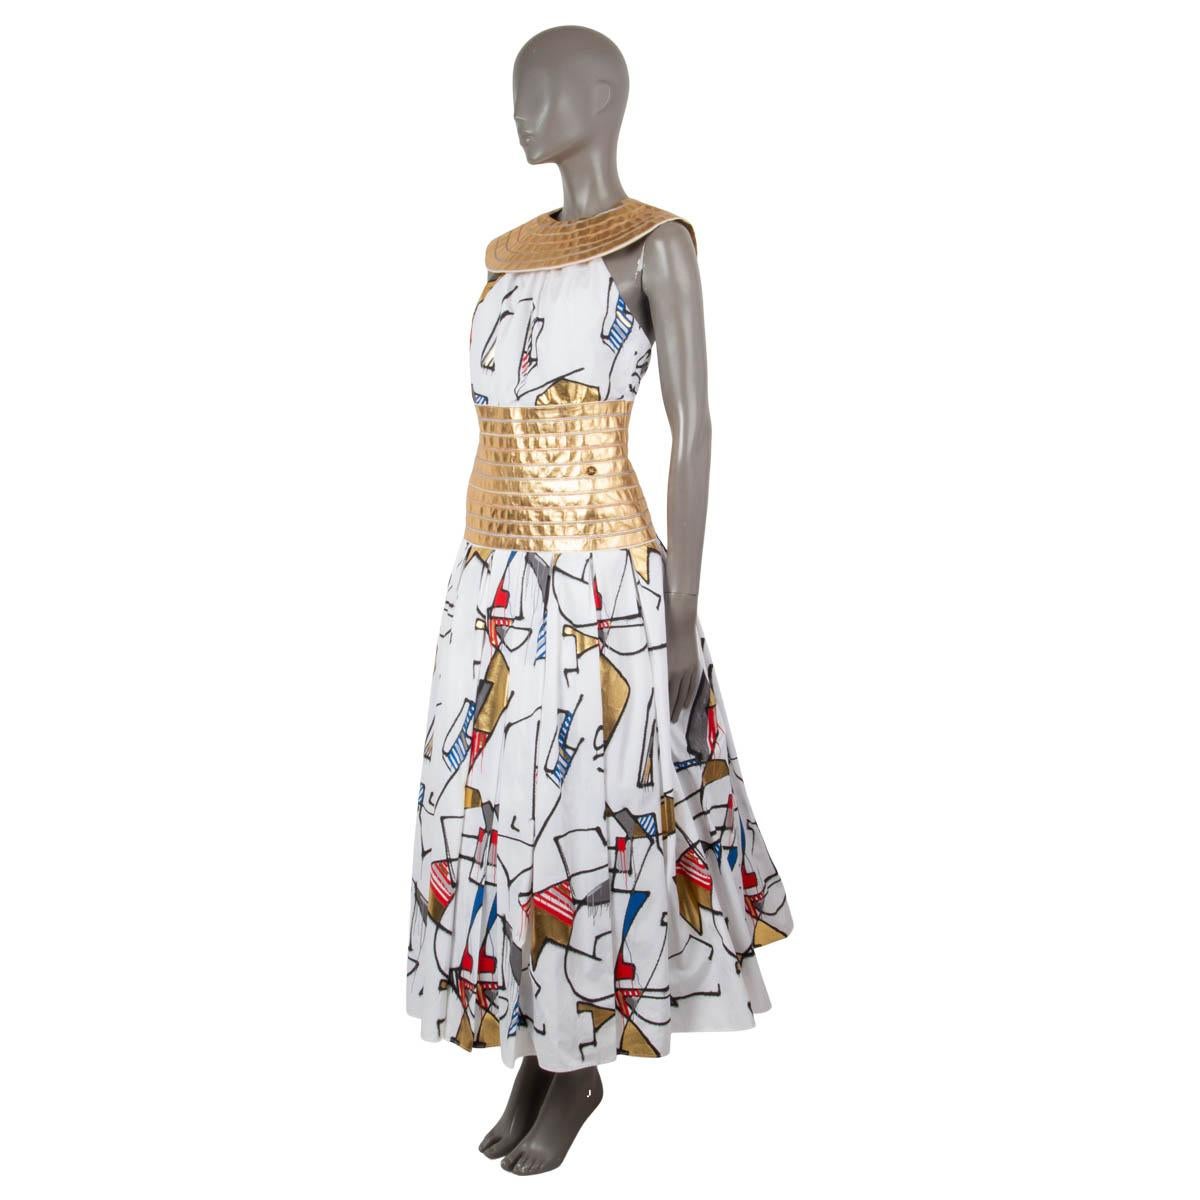 100% authentic Chanel flared and structured graffiti dress in white, gold, red, blue and black cotton (100%) and lined in white silk (100%). The design features a removable gold-tone paneled lambskin collar and waist part. There is a stiff peplum